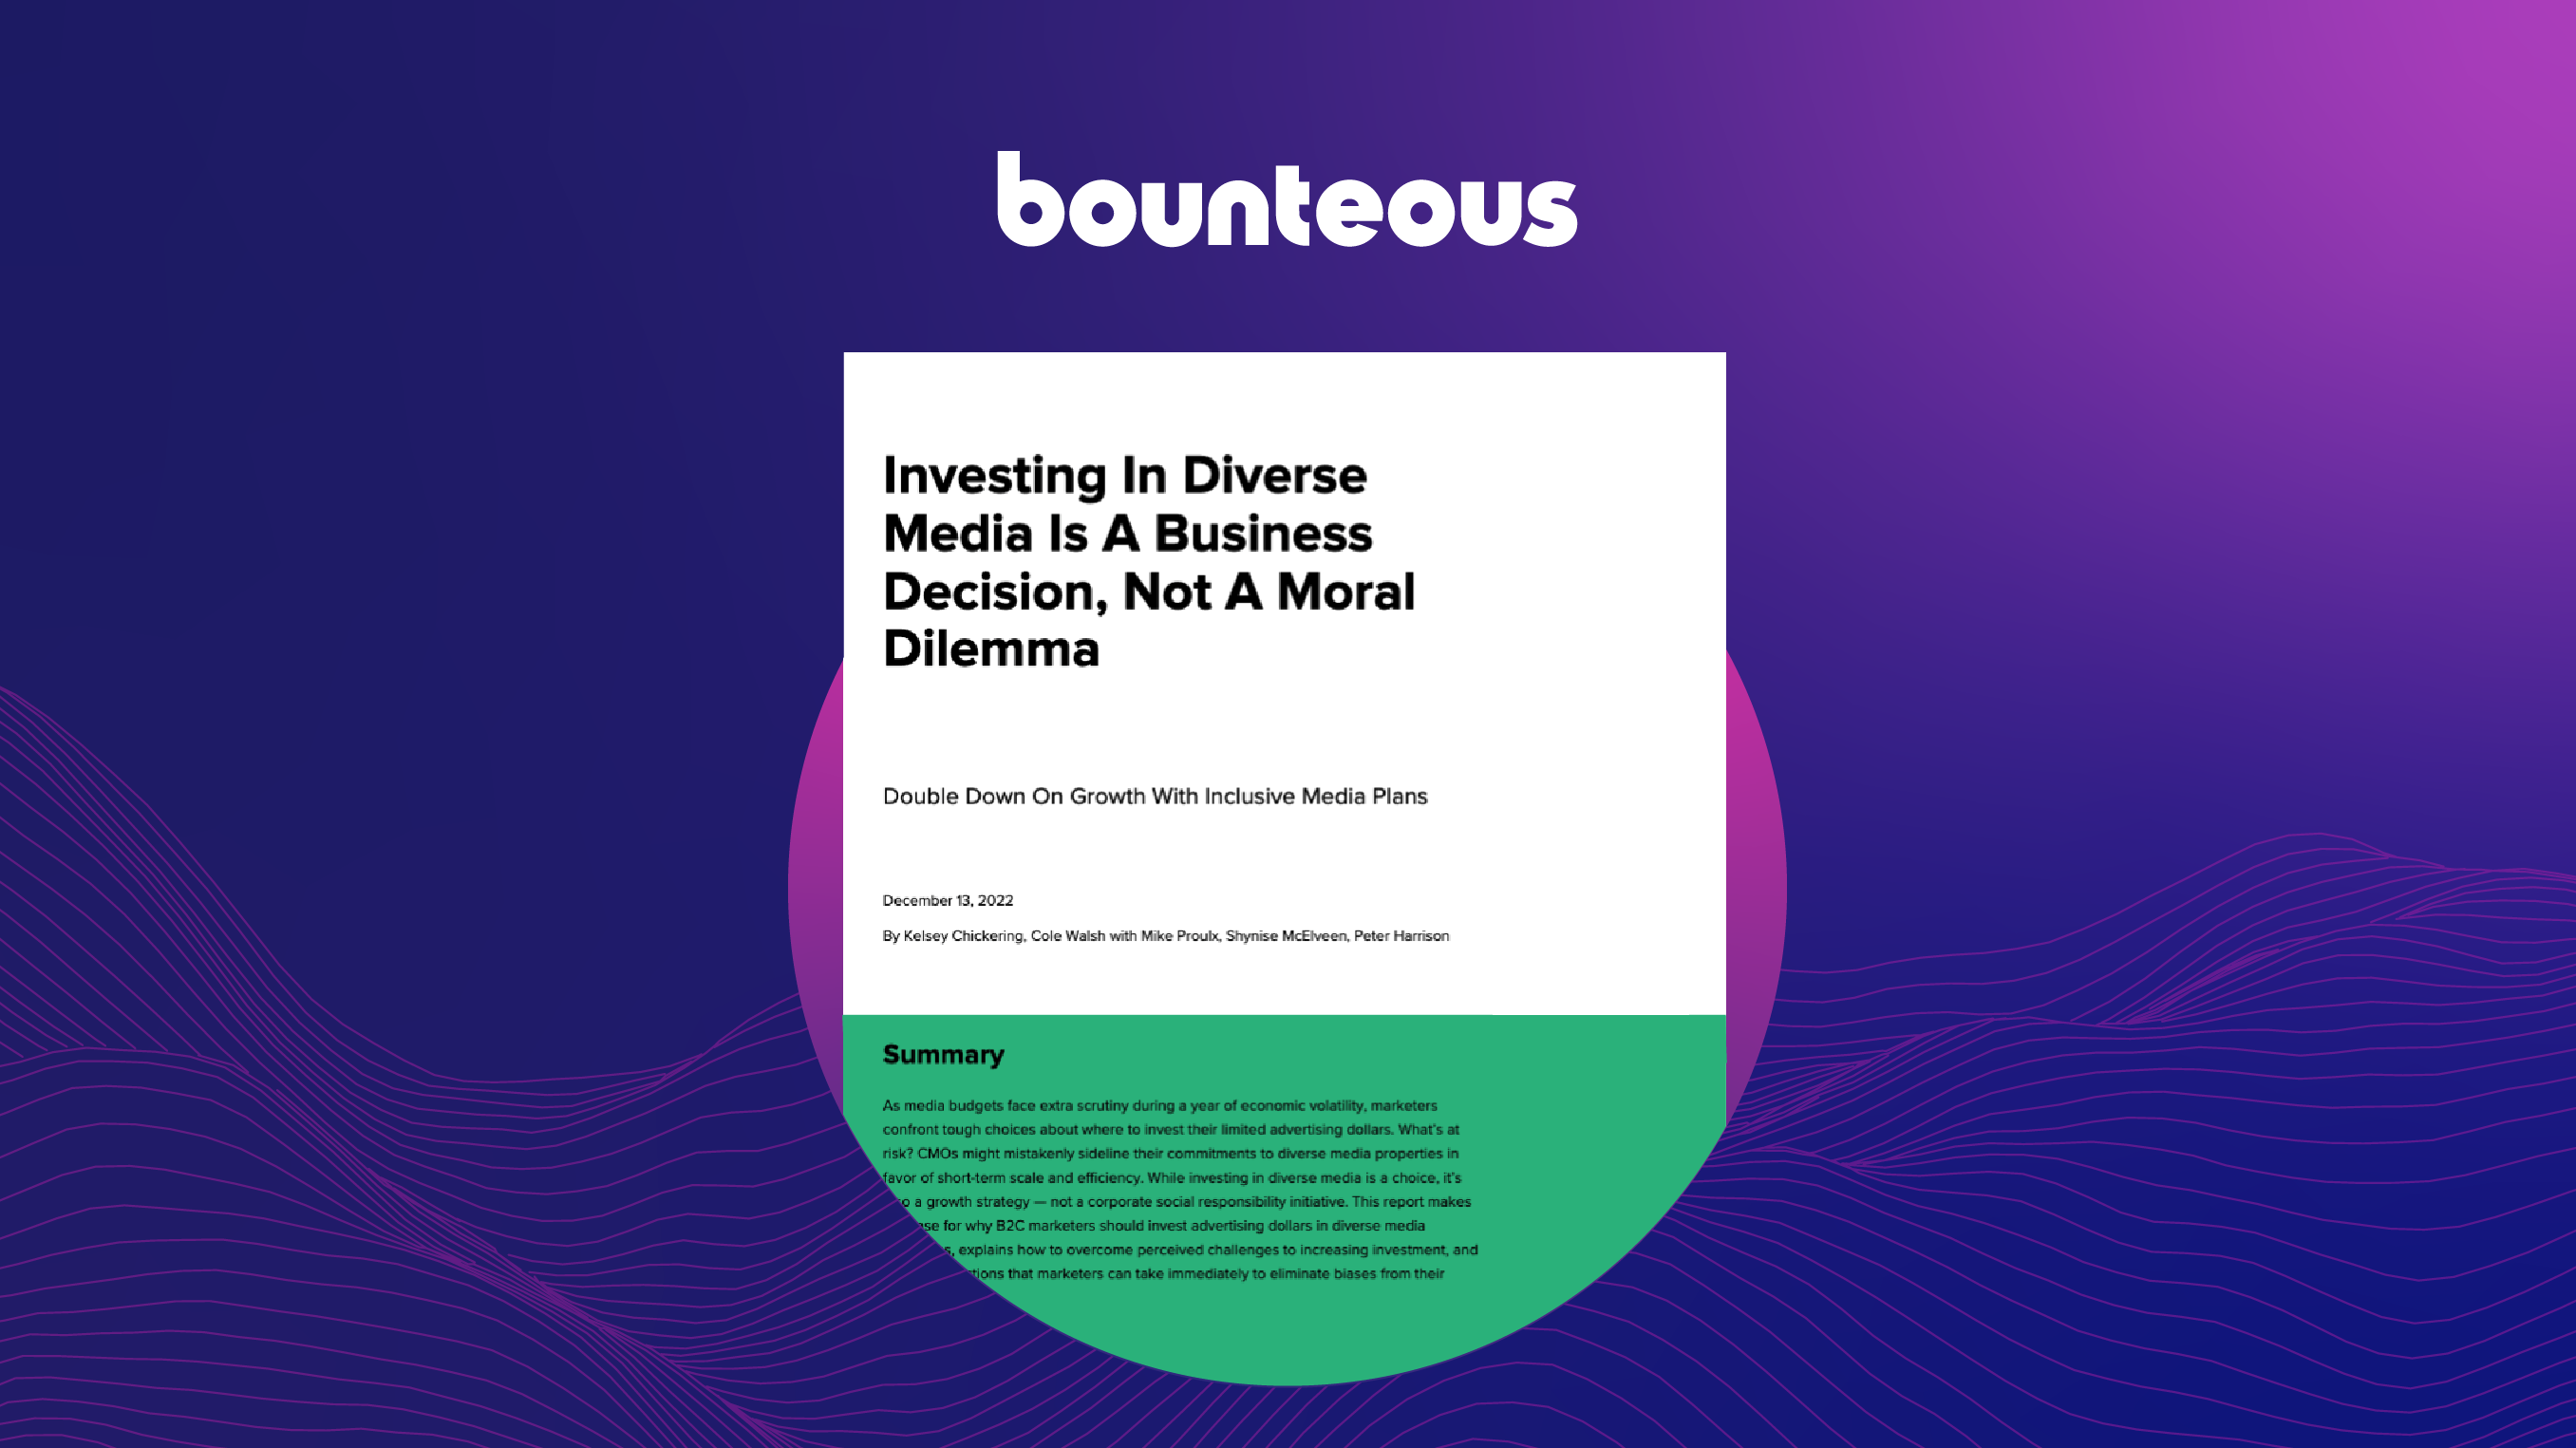 Press Release: Bounteous' Jillian Tate Quoted in Report by Independent Research Firm, 'Investing In Diverse Media Is A Business Decision, Not A Moral Dilemma'